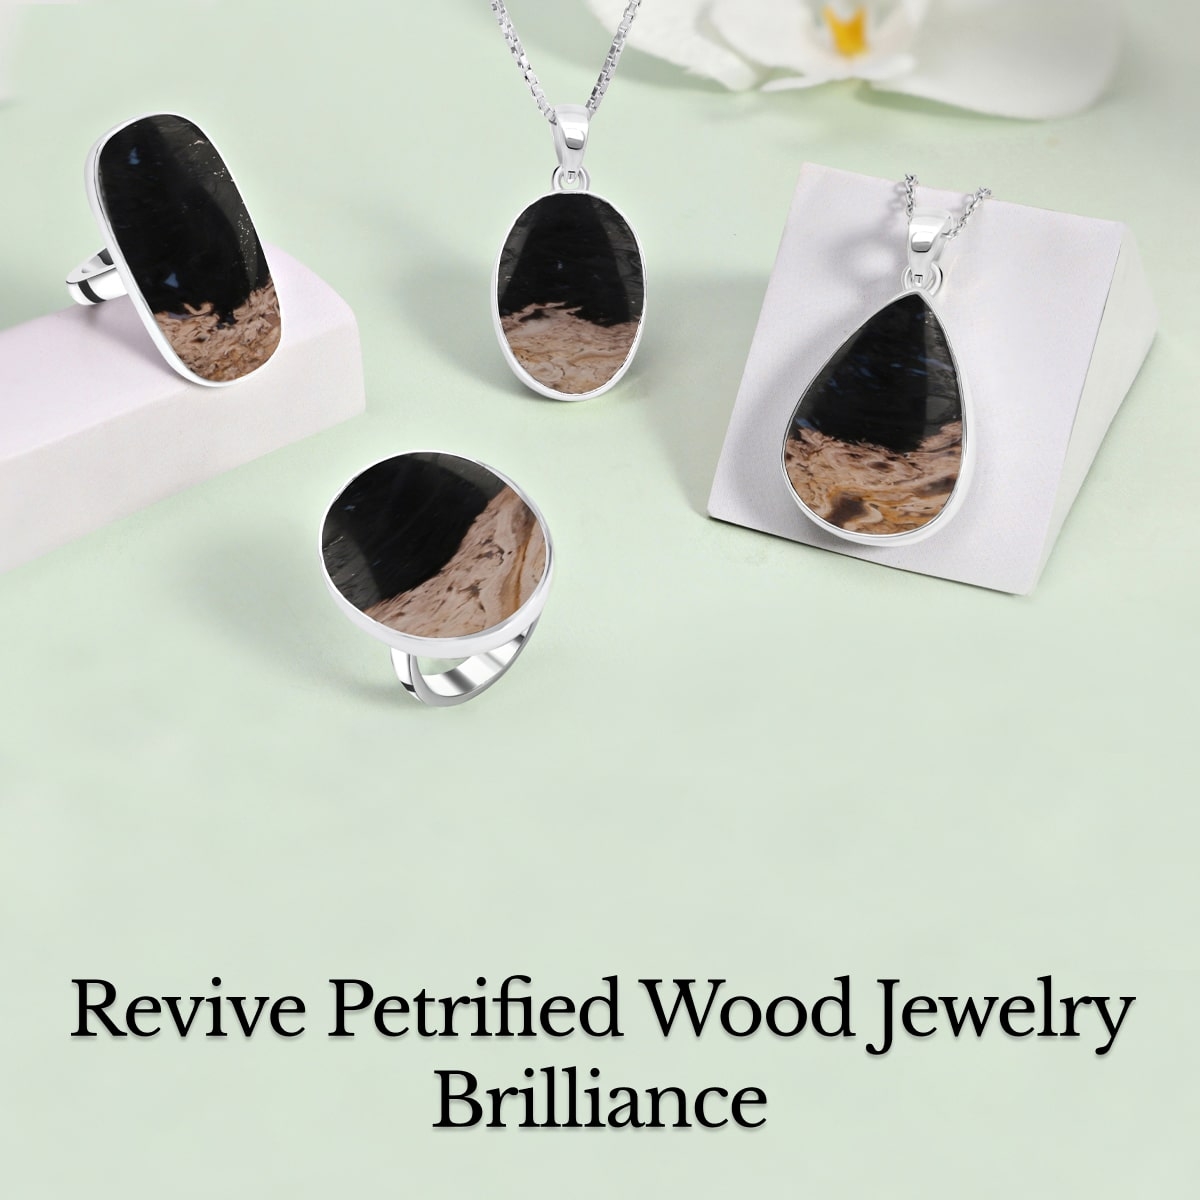 How to Cleanse Your Petrified Wood Jewelry